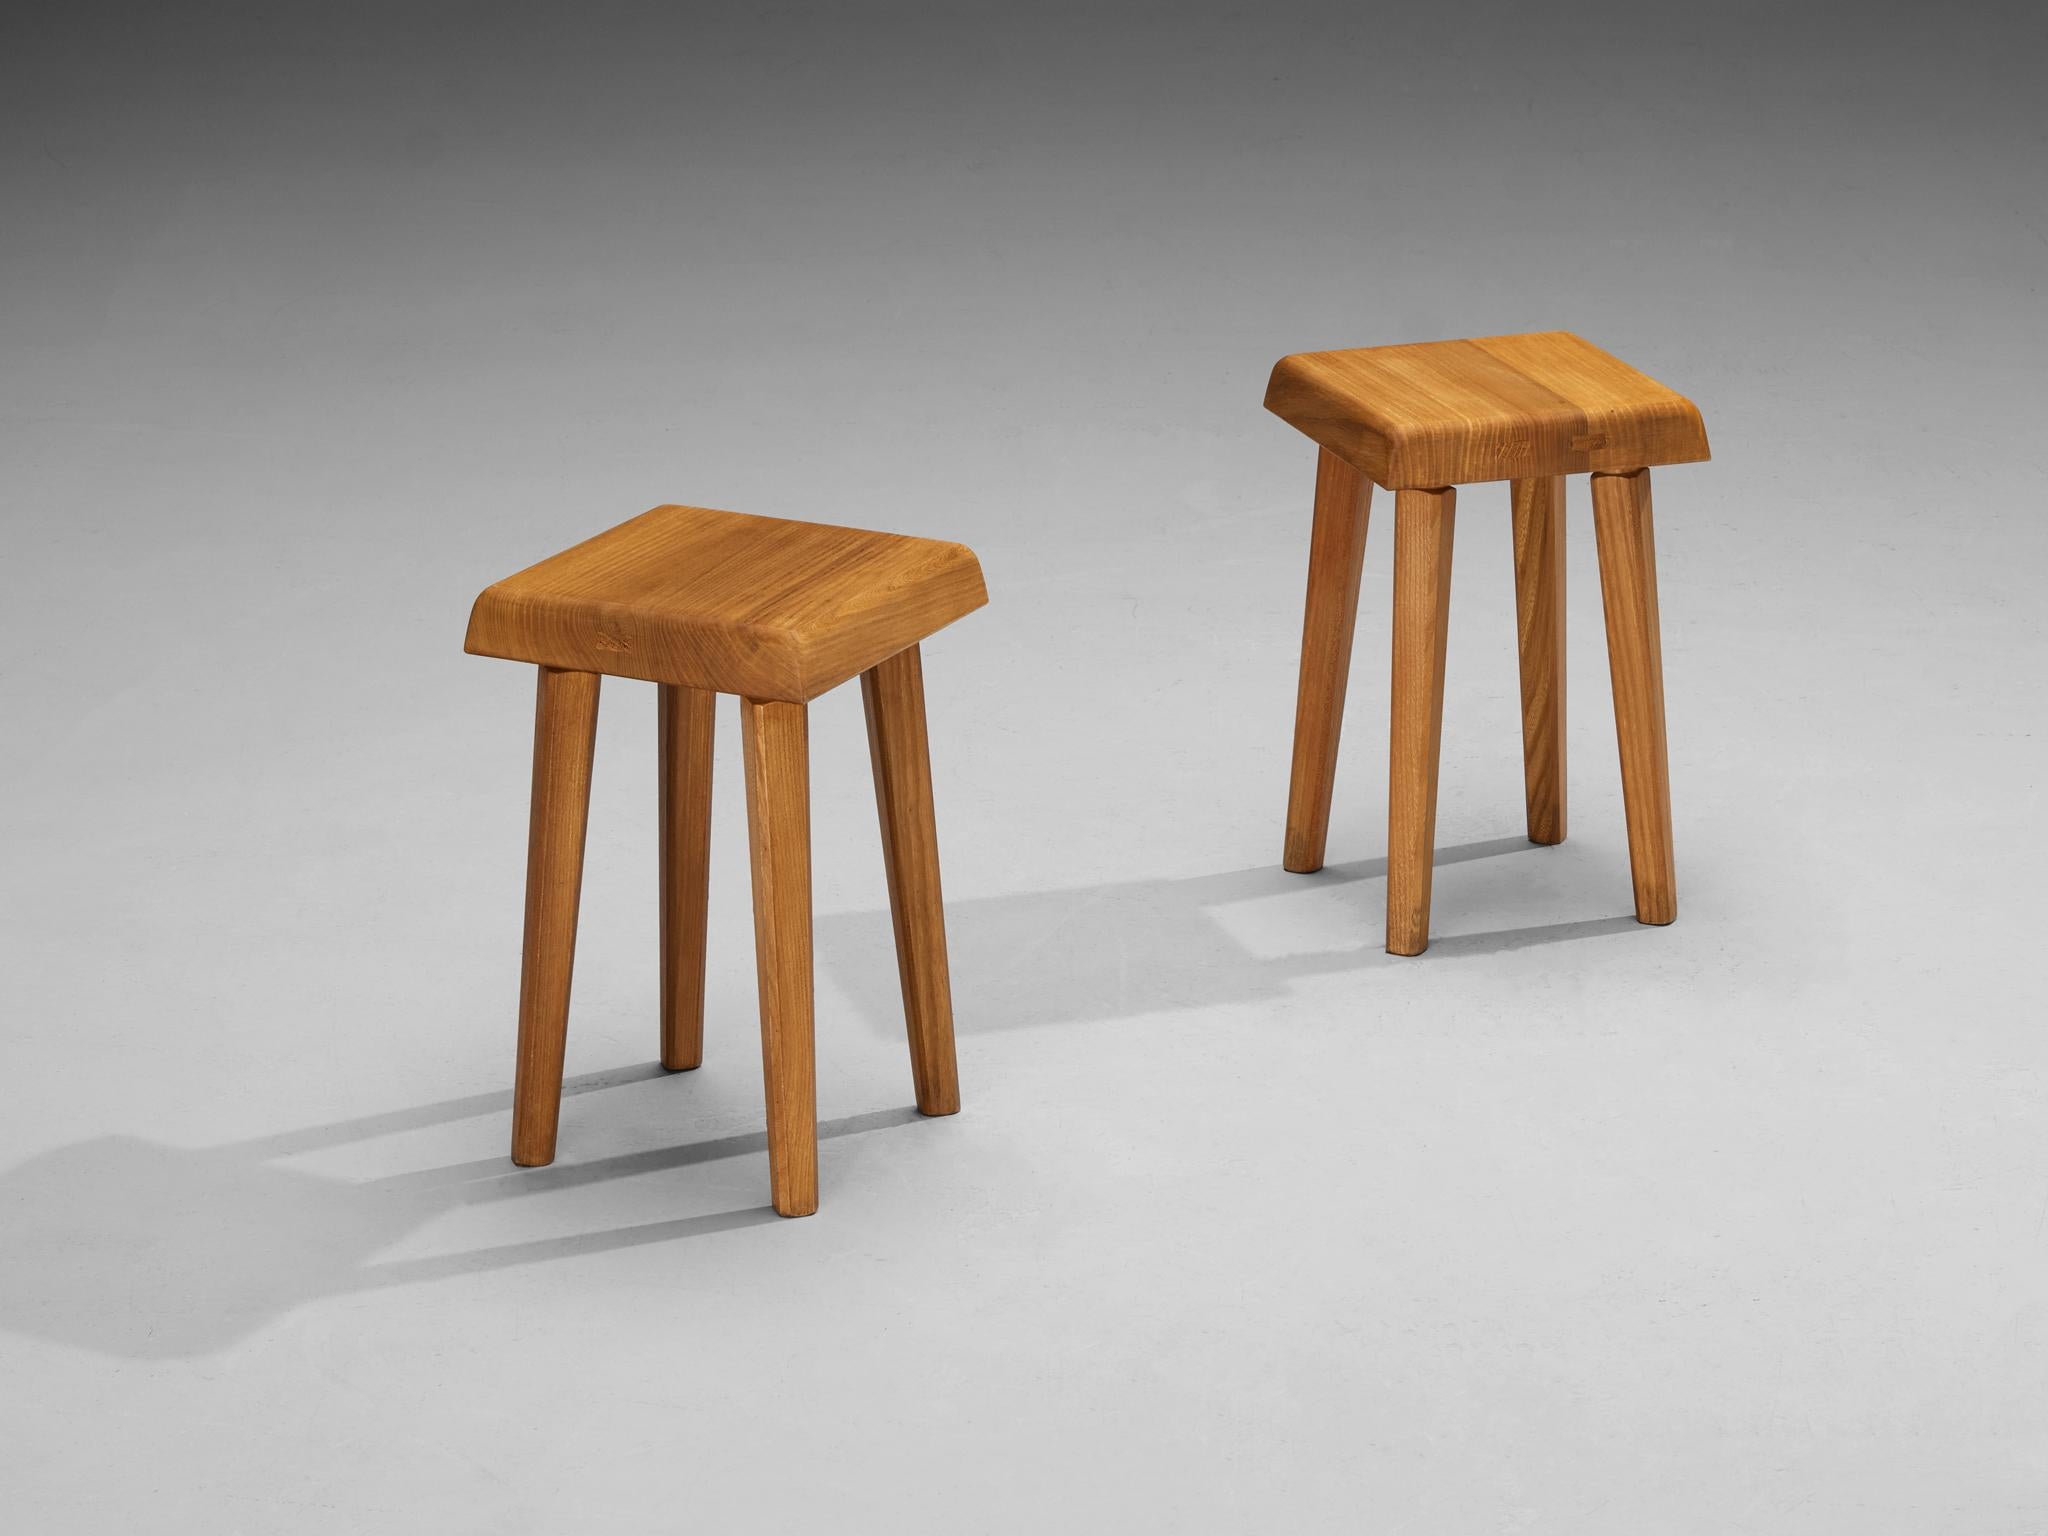 Pierre Chapo, stools, model 'S01A', solid elm, France, design 1962

This set of modernized farm stools have a robust and rustic character and showcases the characteristics of Pierre Chapo. First of all the material is typical for Chapo who preferred